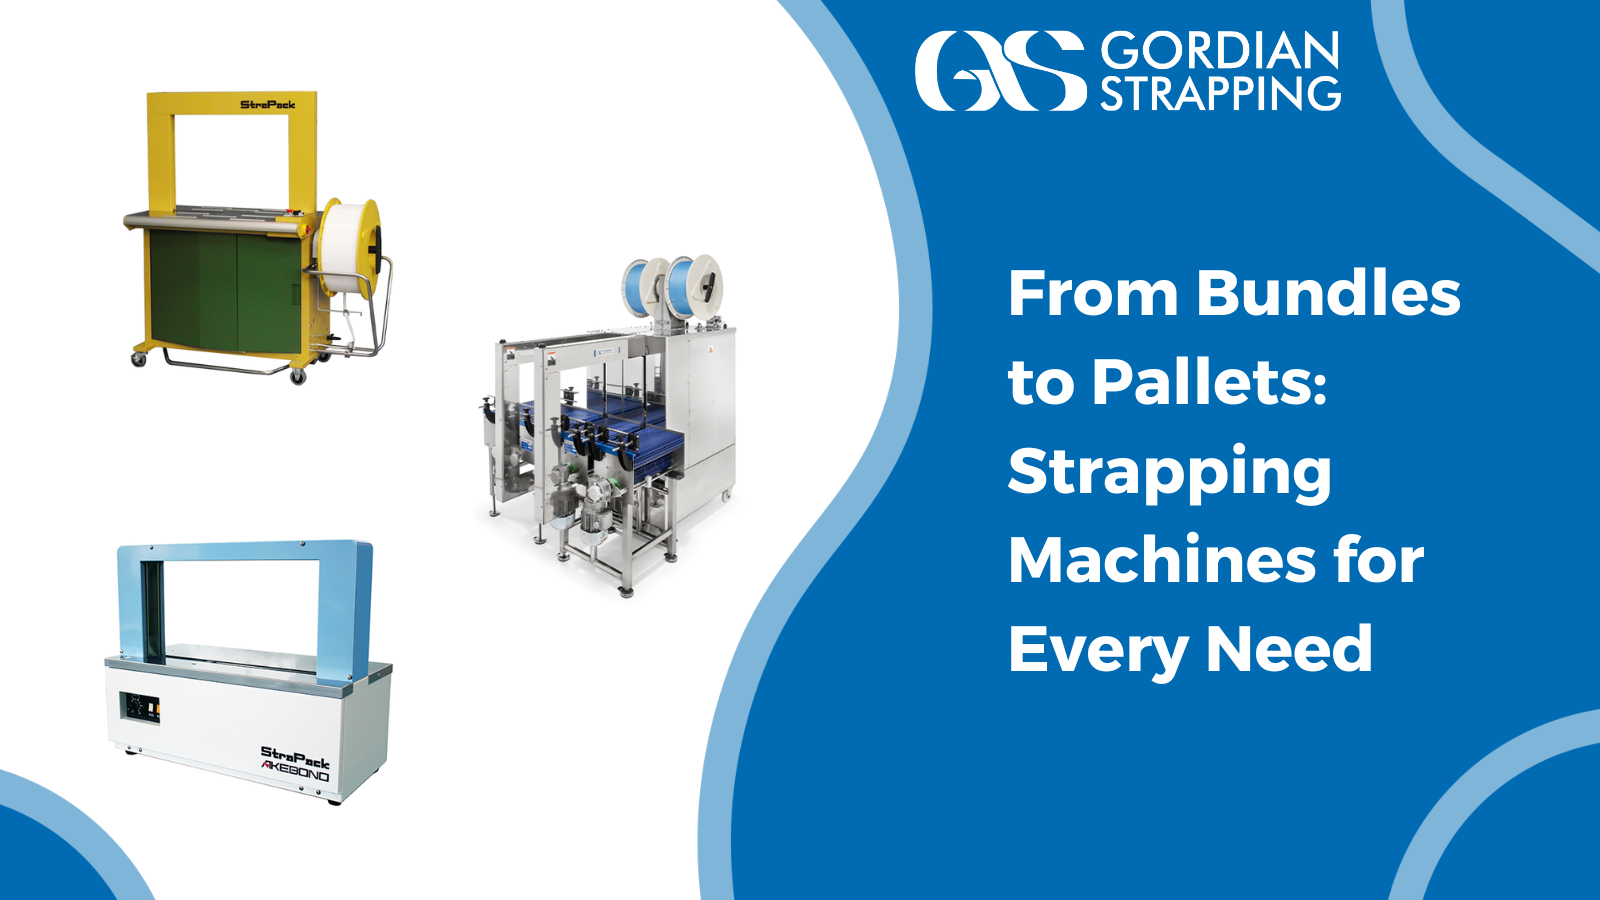 From Bundles to Pallets: Strapping Machines for Every Need